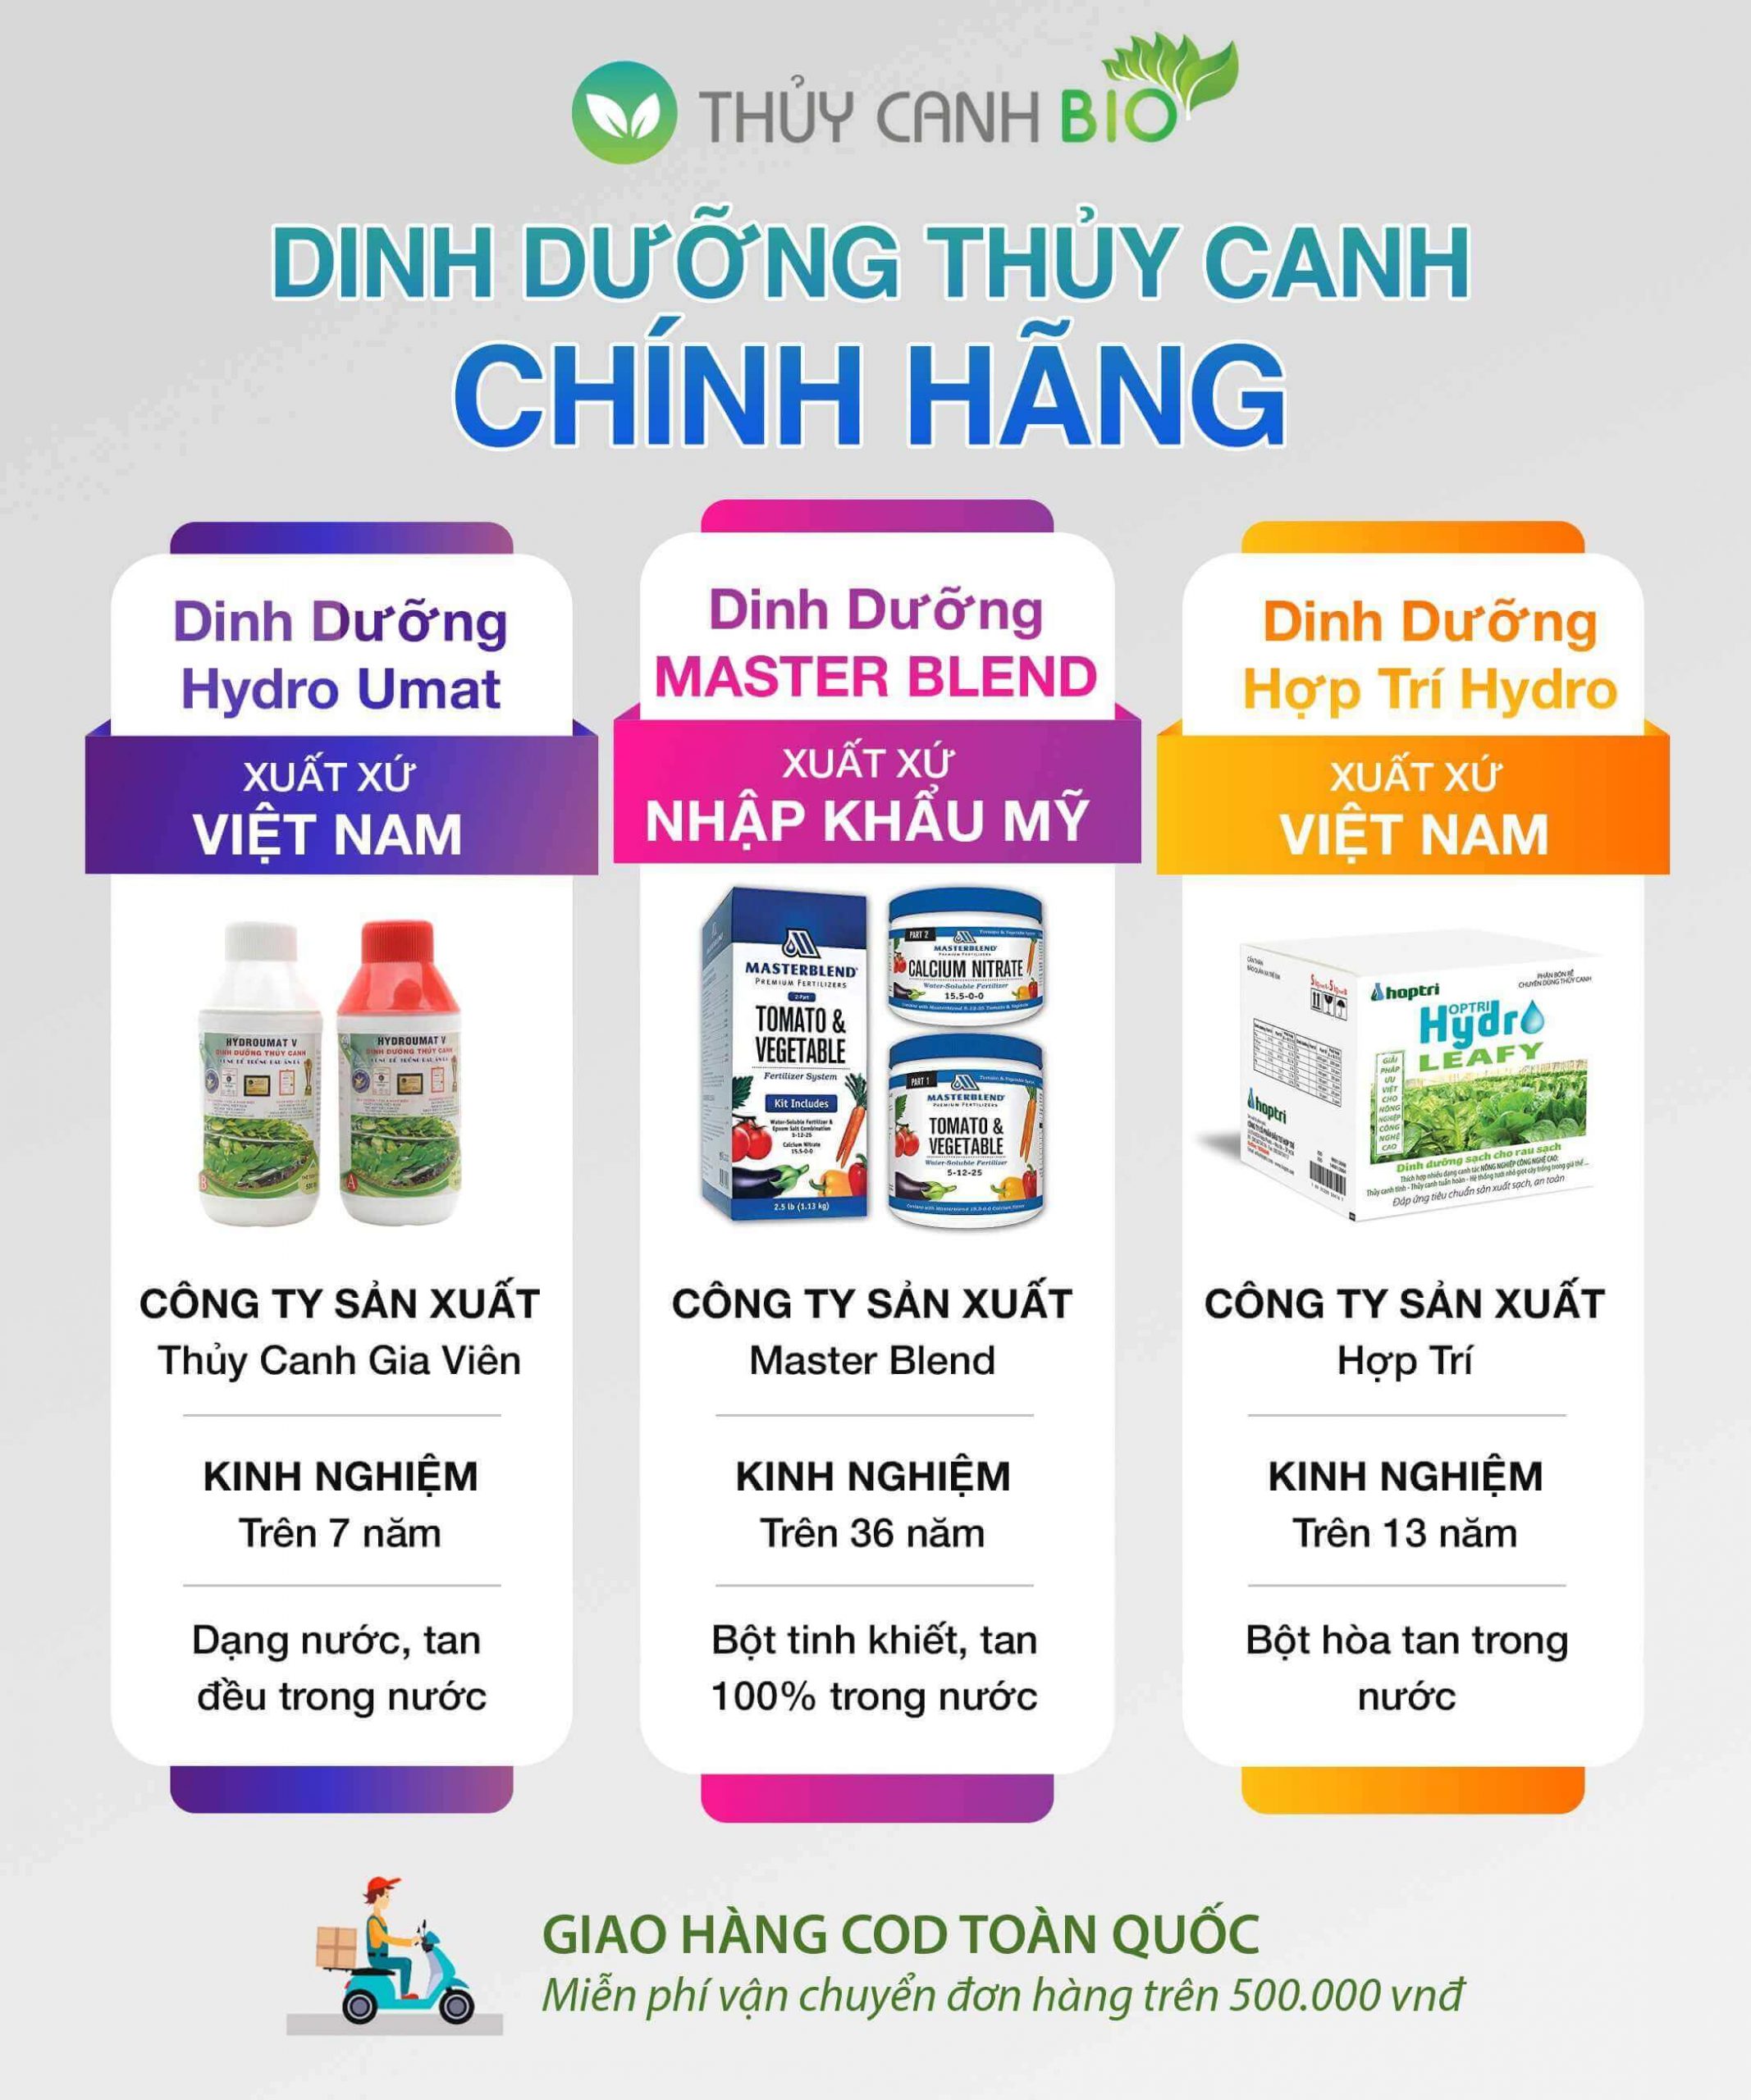 cach-pha-dung-dich-thuy-canh